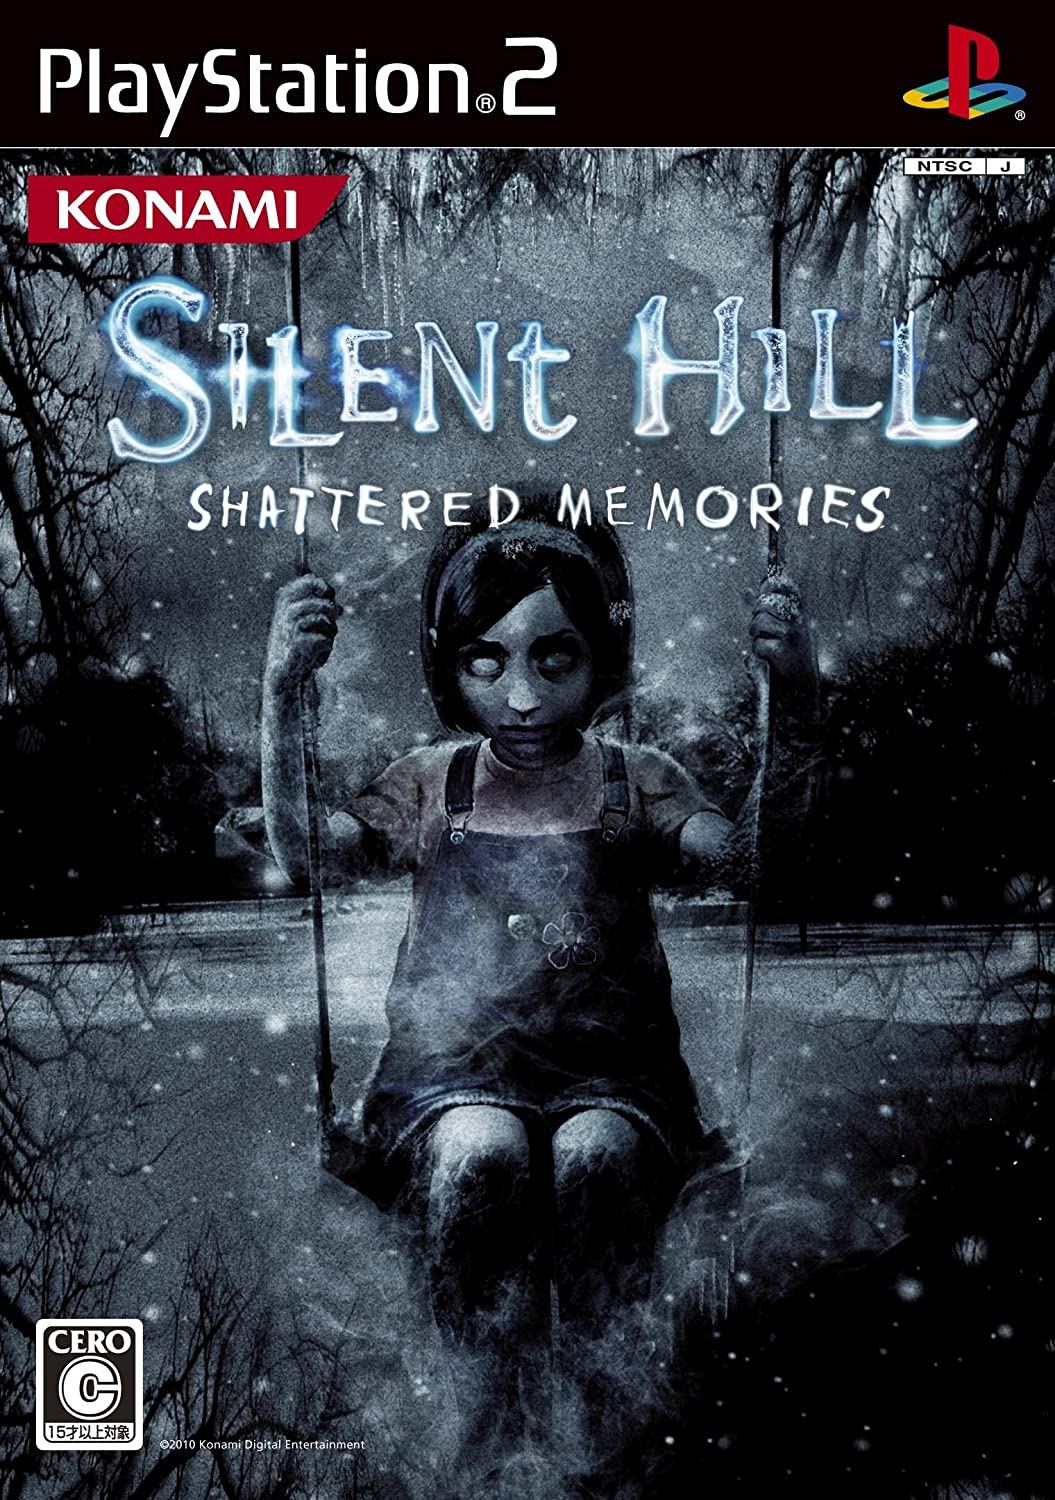 Silent Hill: Shattered Memories for PlayStation 2